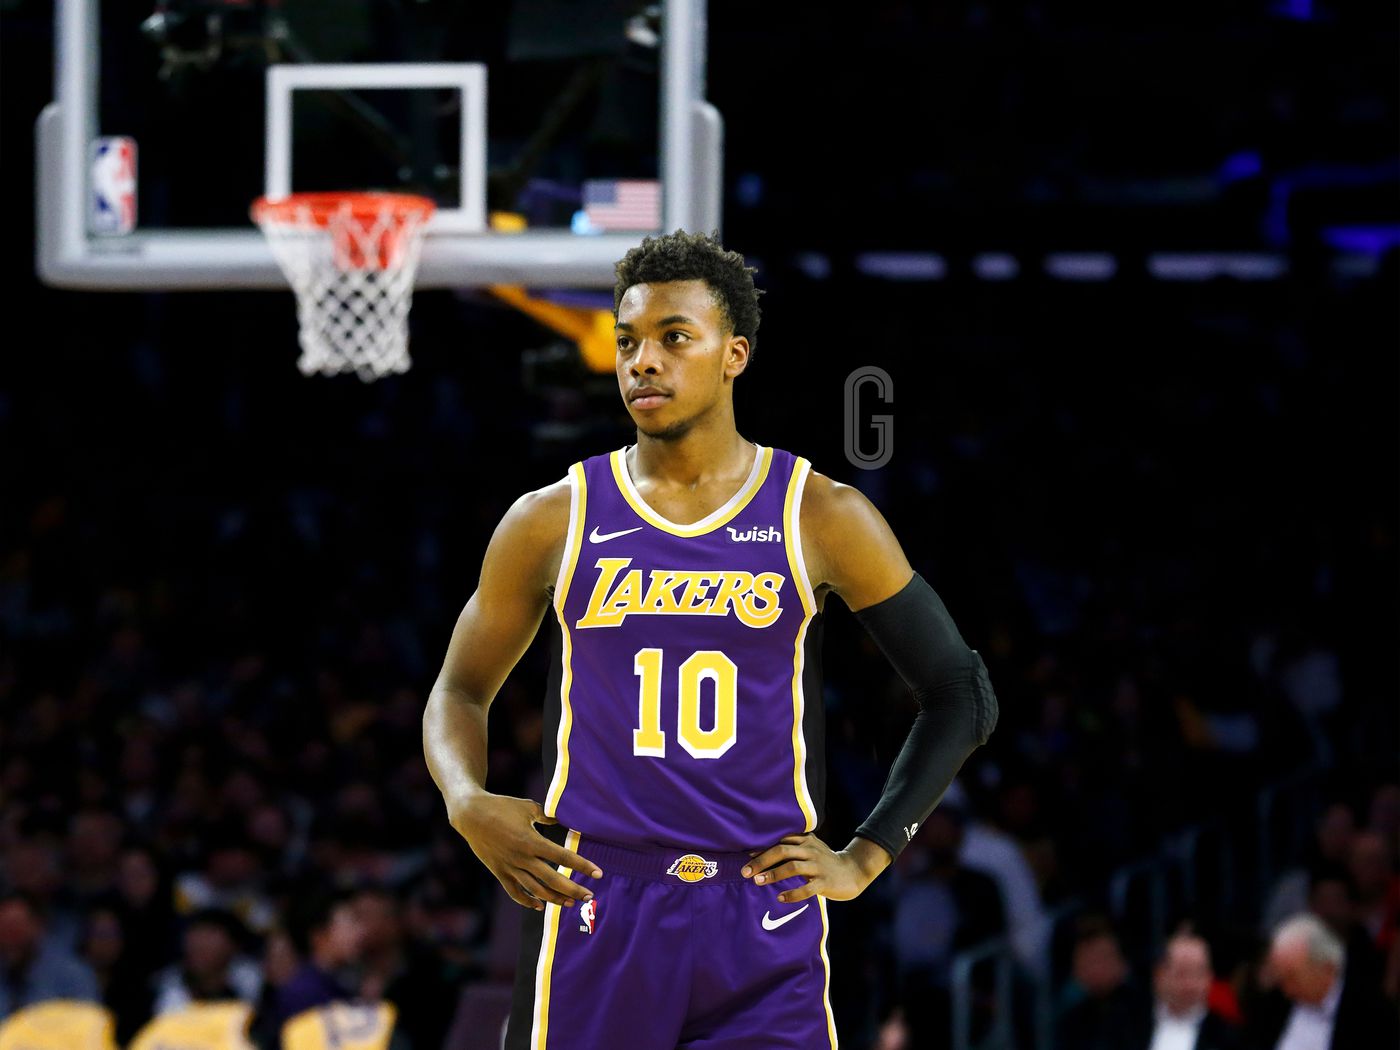 Darius Garland says it would be an honor to play for the Lakers